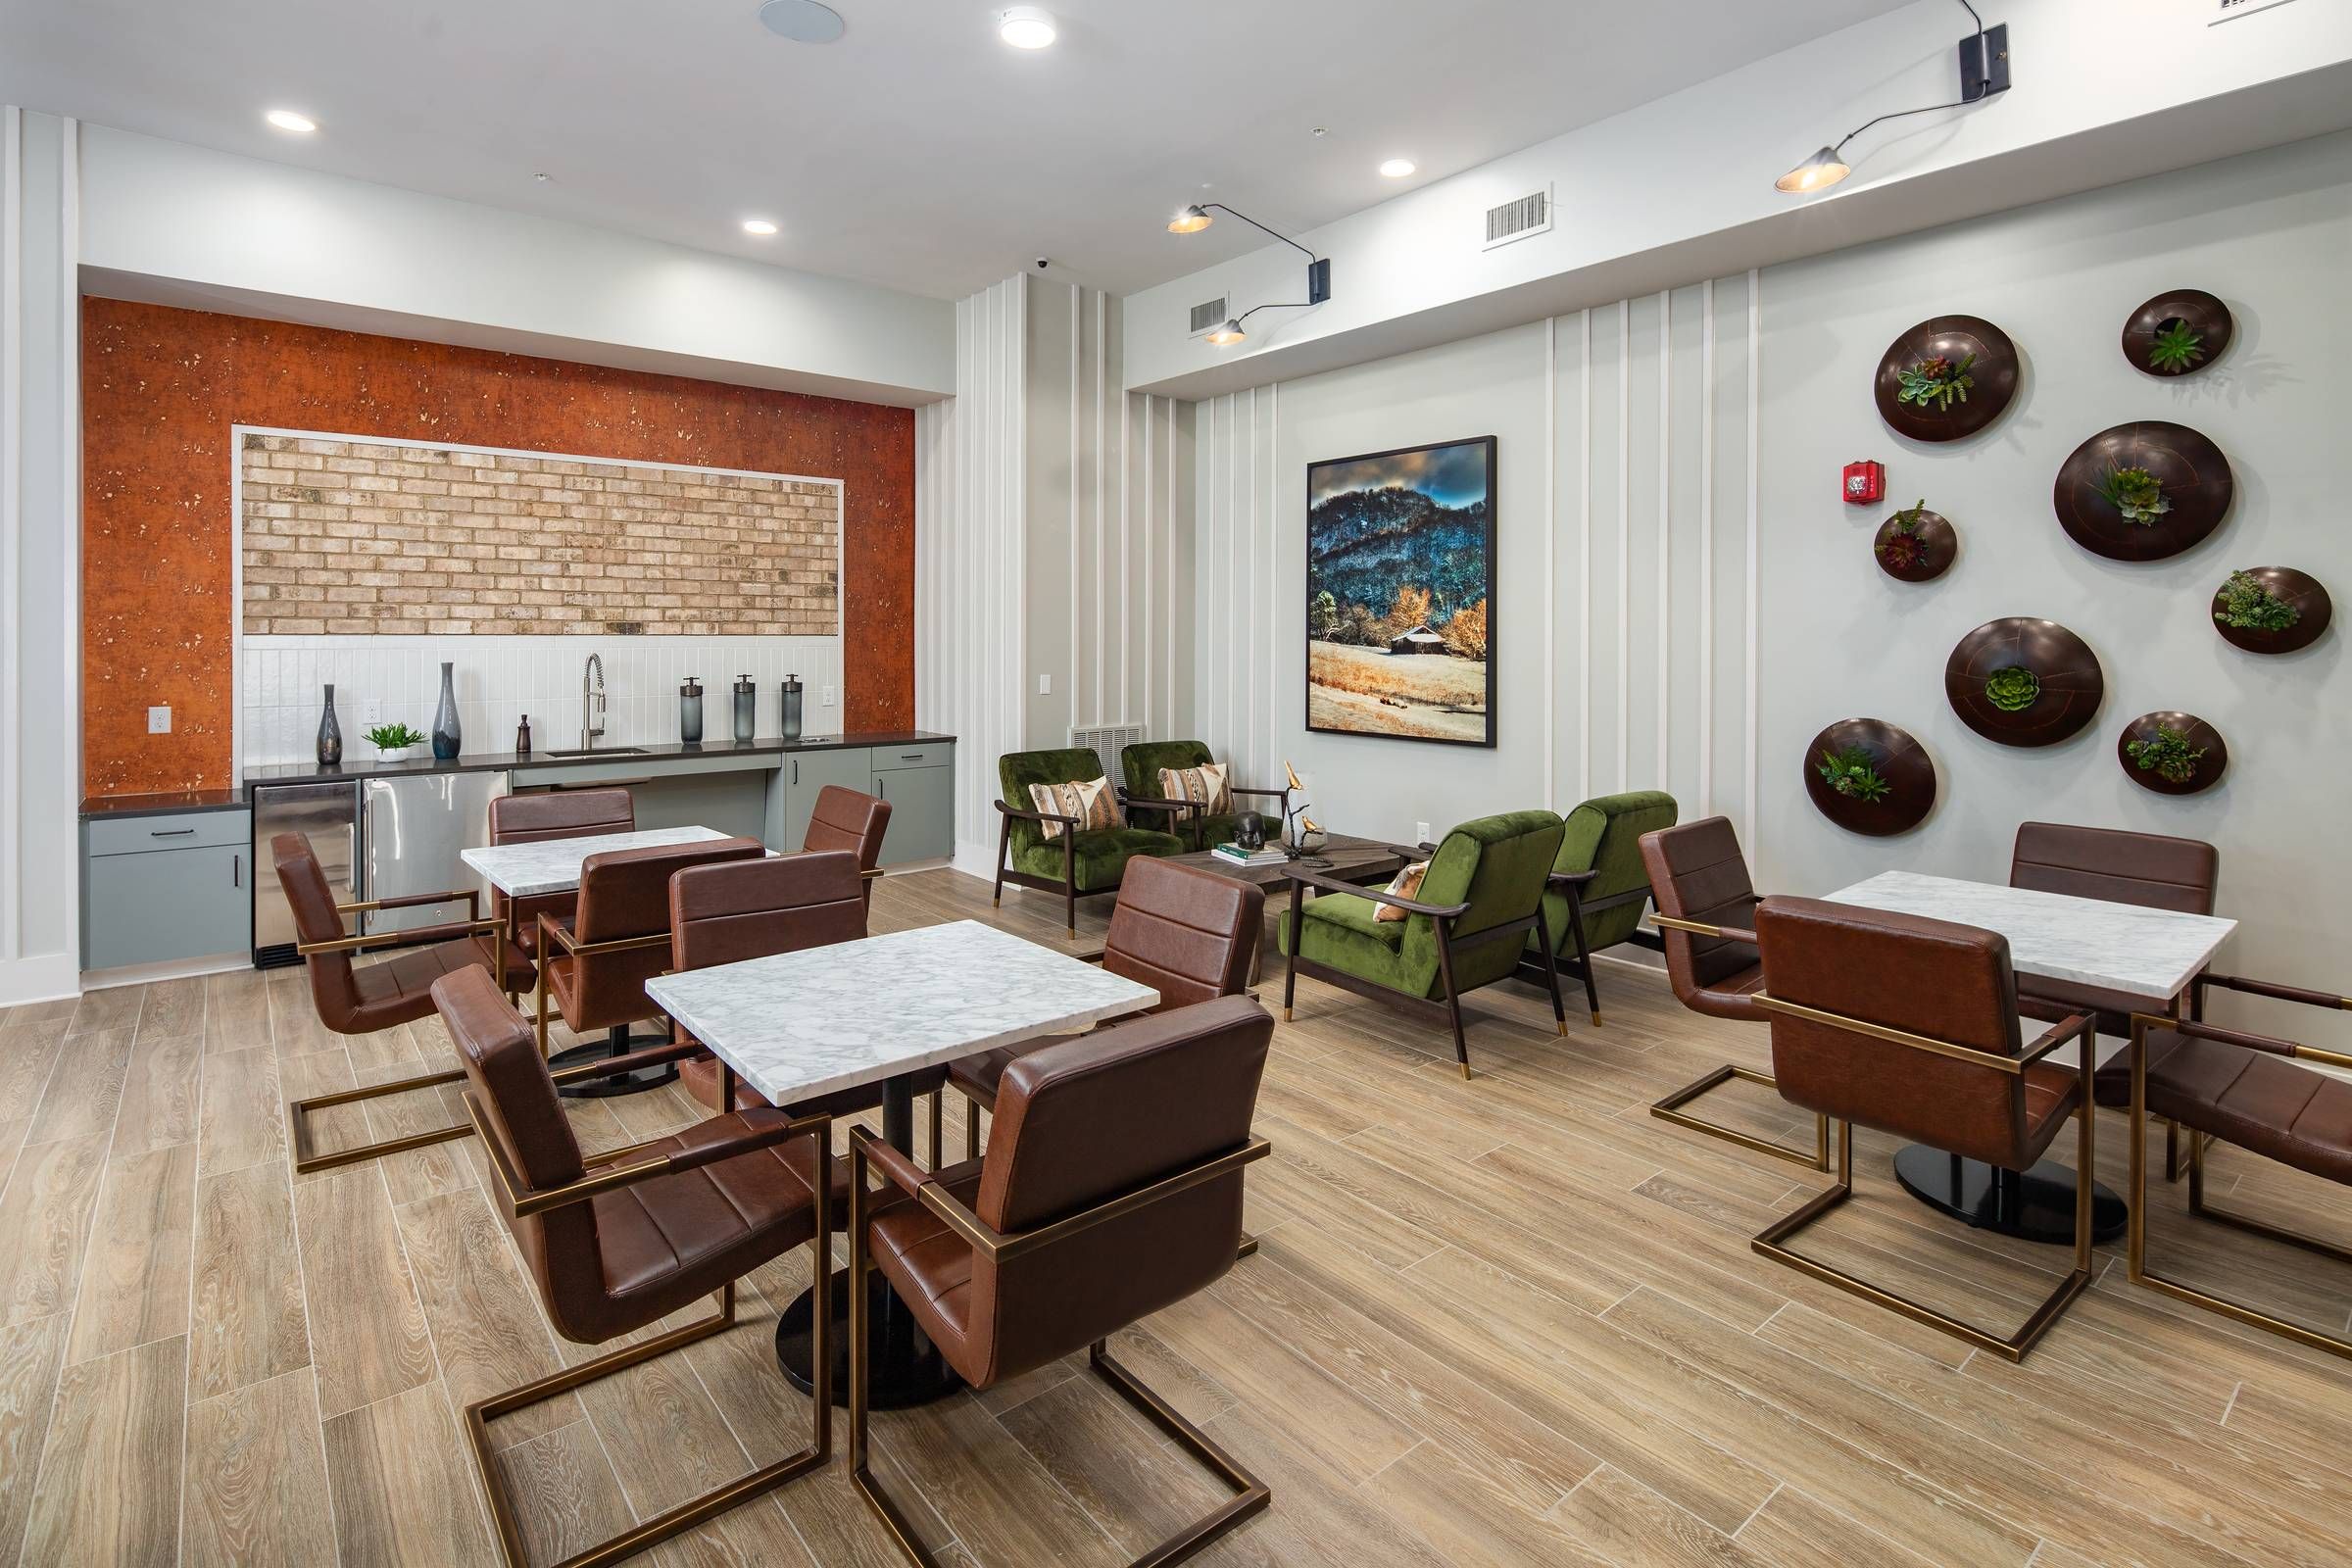 Alta Sugarloaf's dining space with leather chairs, marble-top tables, and a kitchenette against a brick backsplash, complemented by vertical greenery and modern artwork.